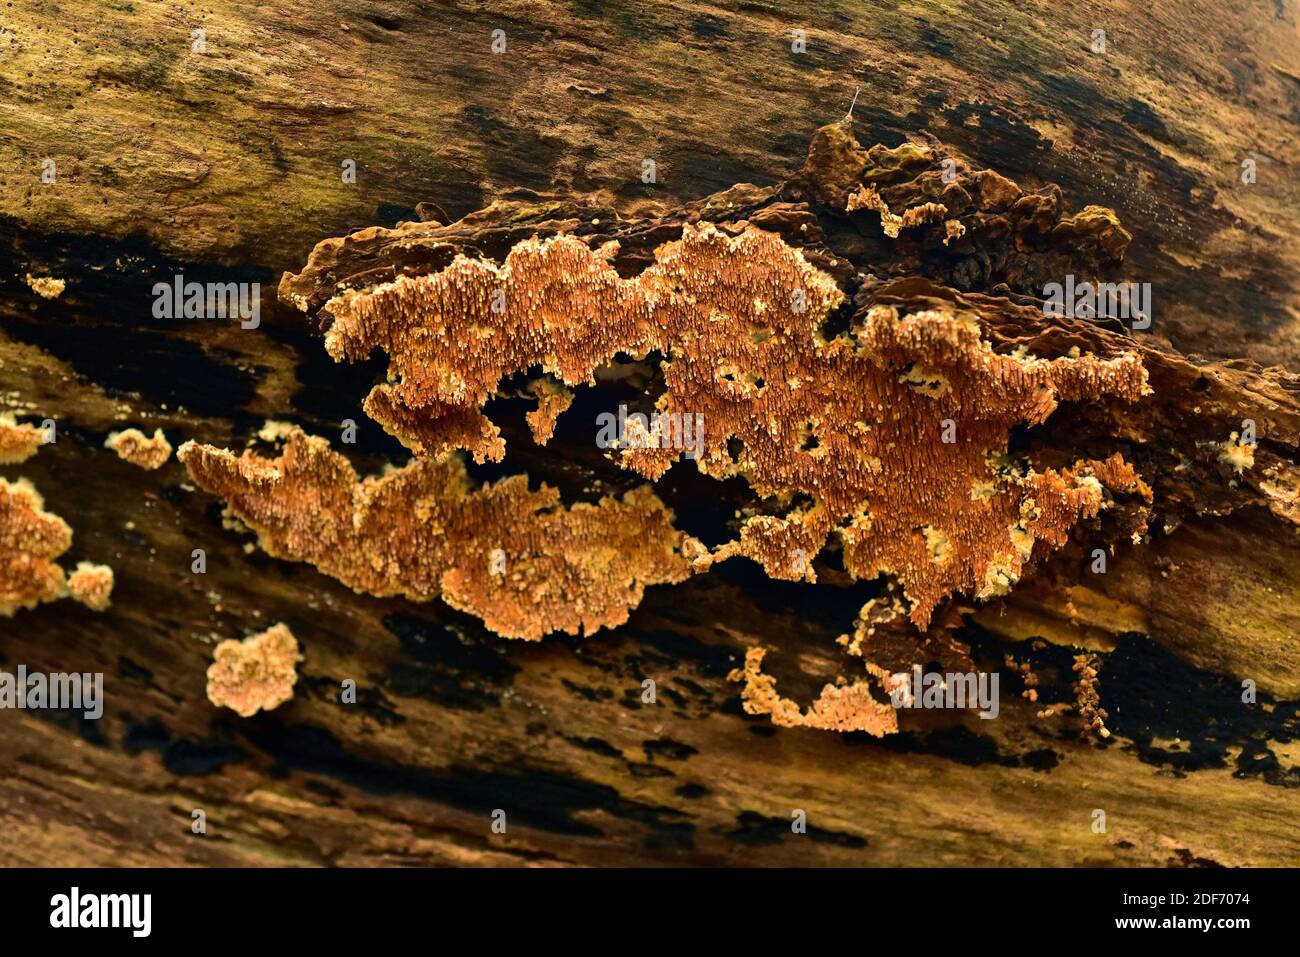 Ochre spreading tooth (Steccherinum ochraceum) is a parasitic fungus. This photo was taken in Dalby National Park, Skane, Sweden. Stock Photo